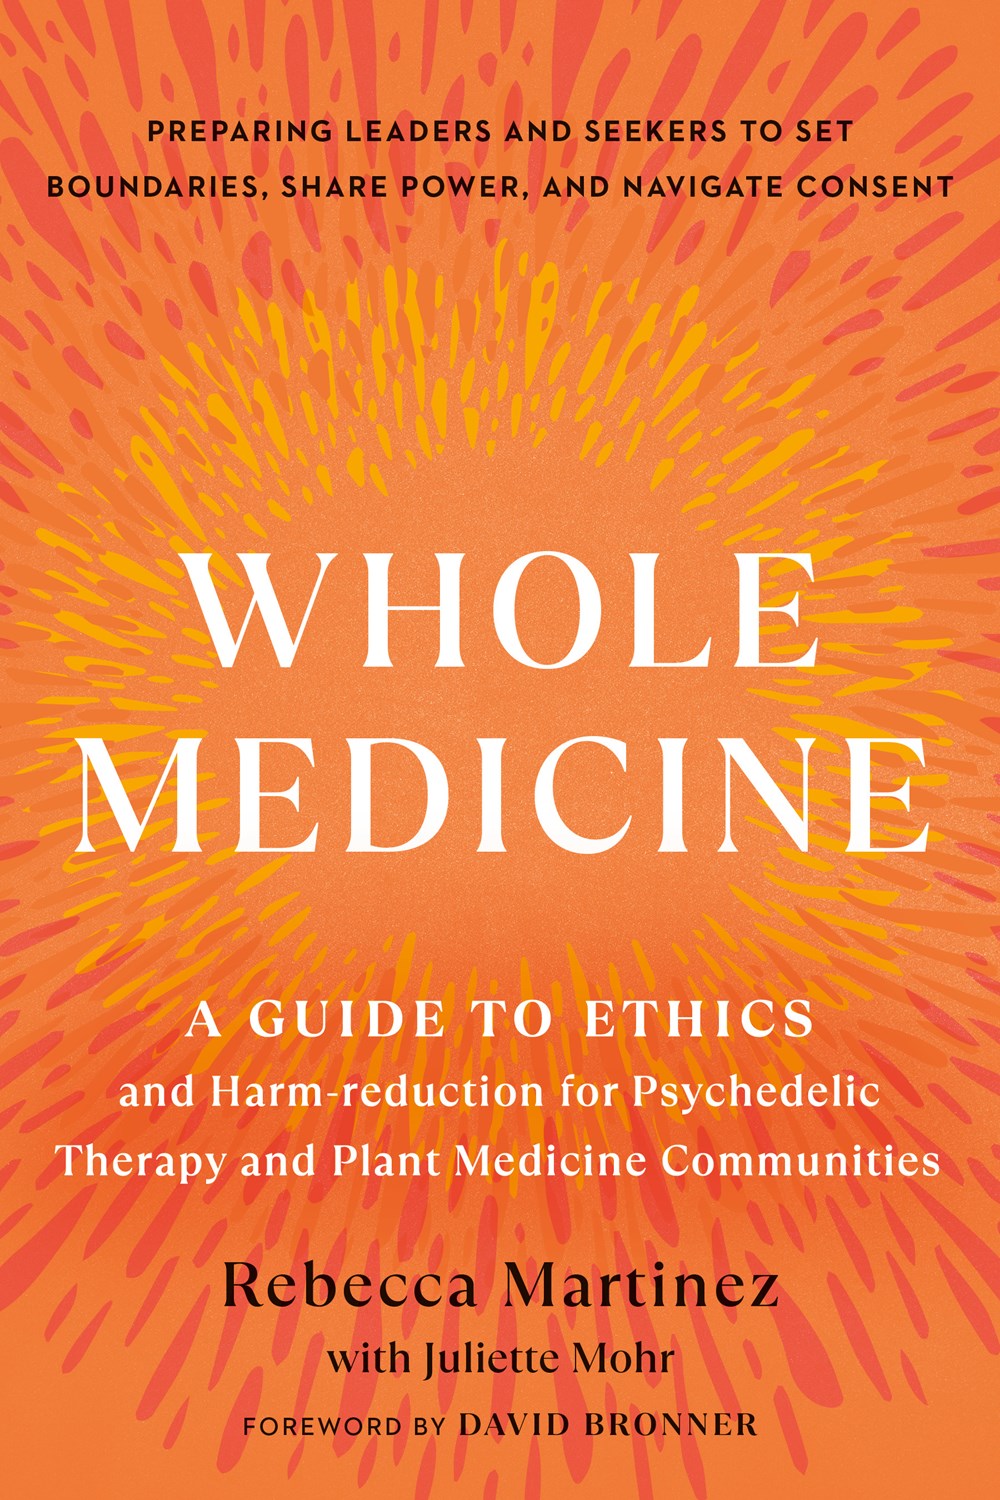 PRE-ORDER: Whole Medicine : A Guide to Ethics and Harm-Reduction for Psychedelic Therapy and Plant Medicine Communities